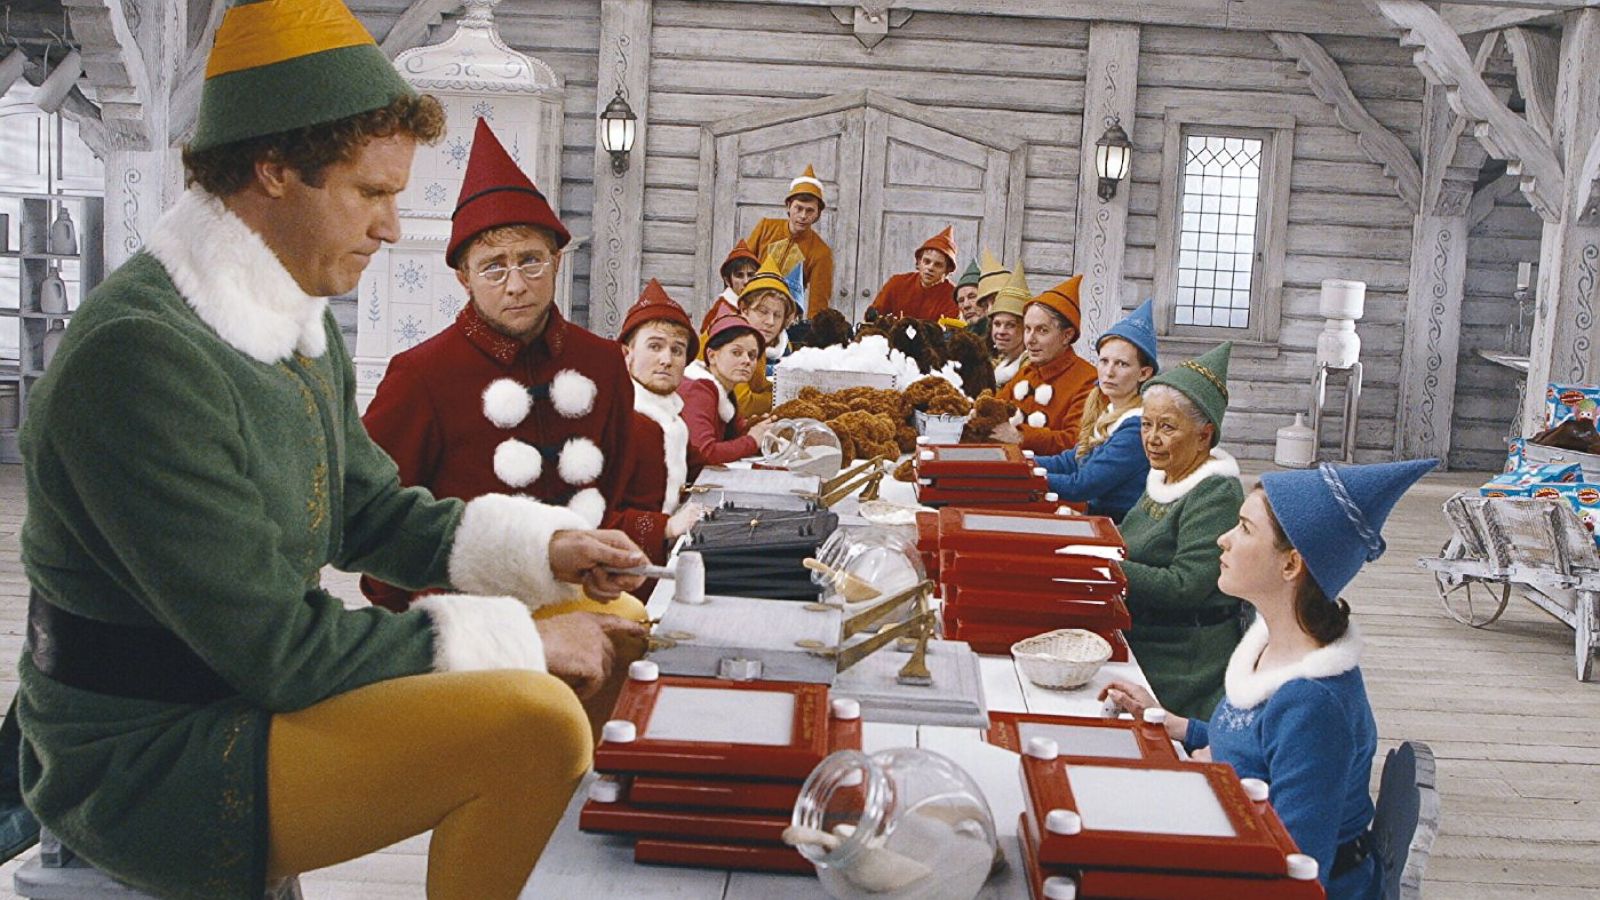 Elf continues to resonate with people.